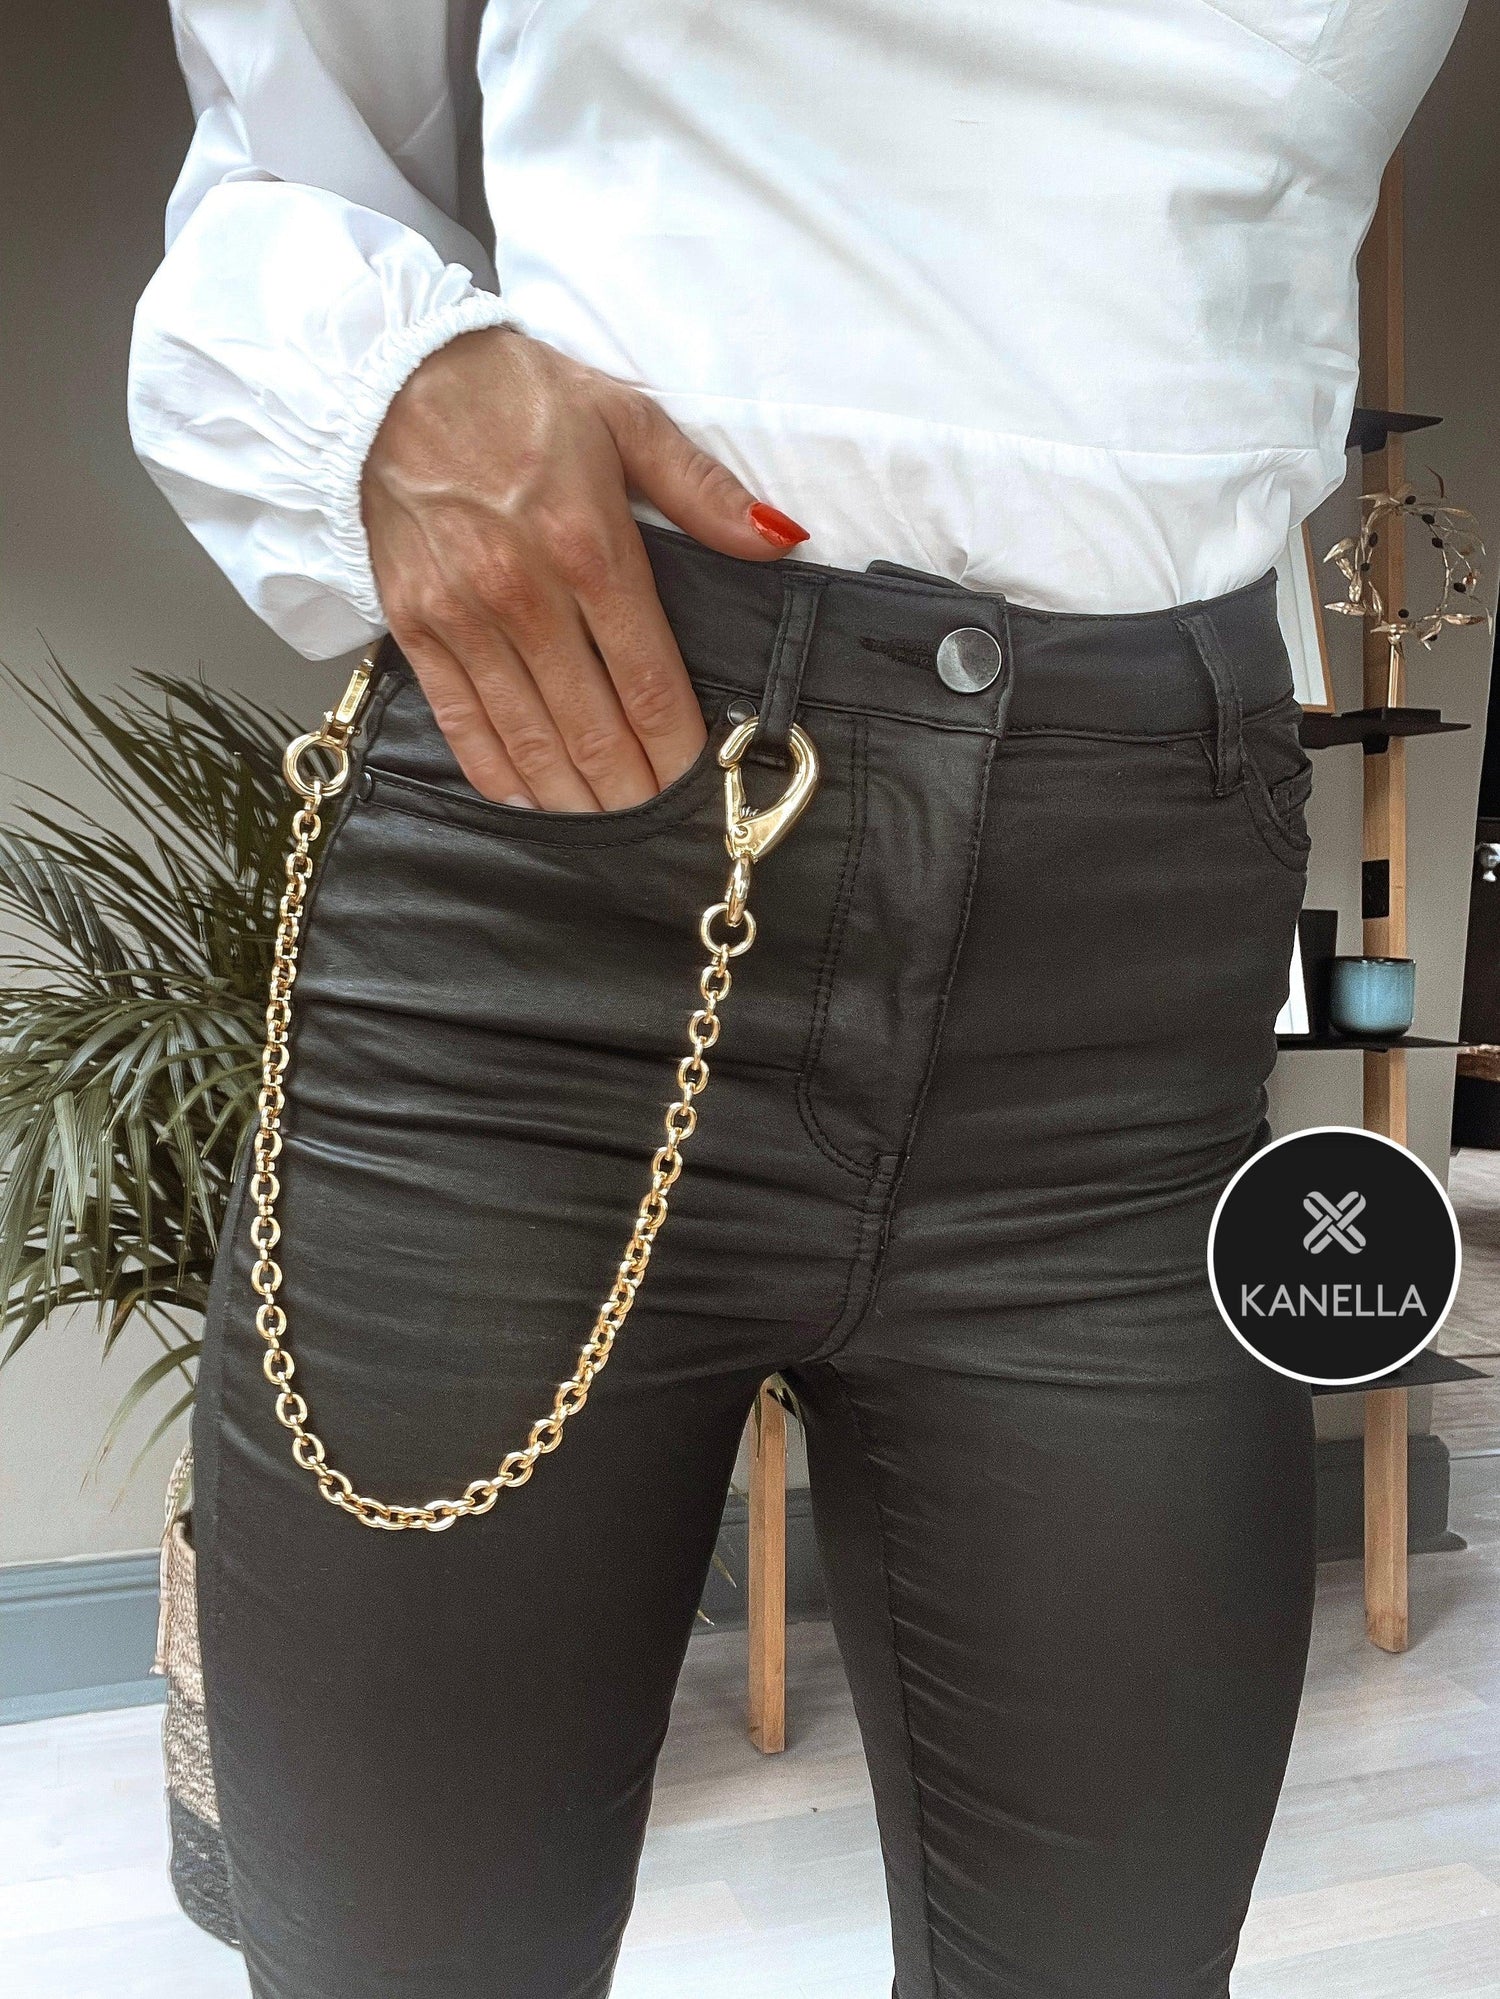 Chain - Kanella Leather